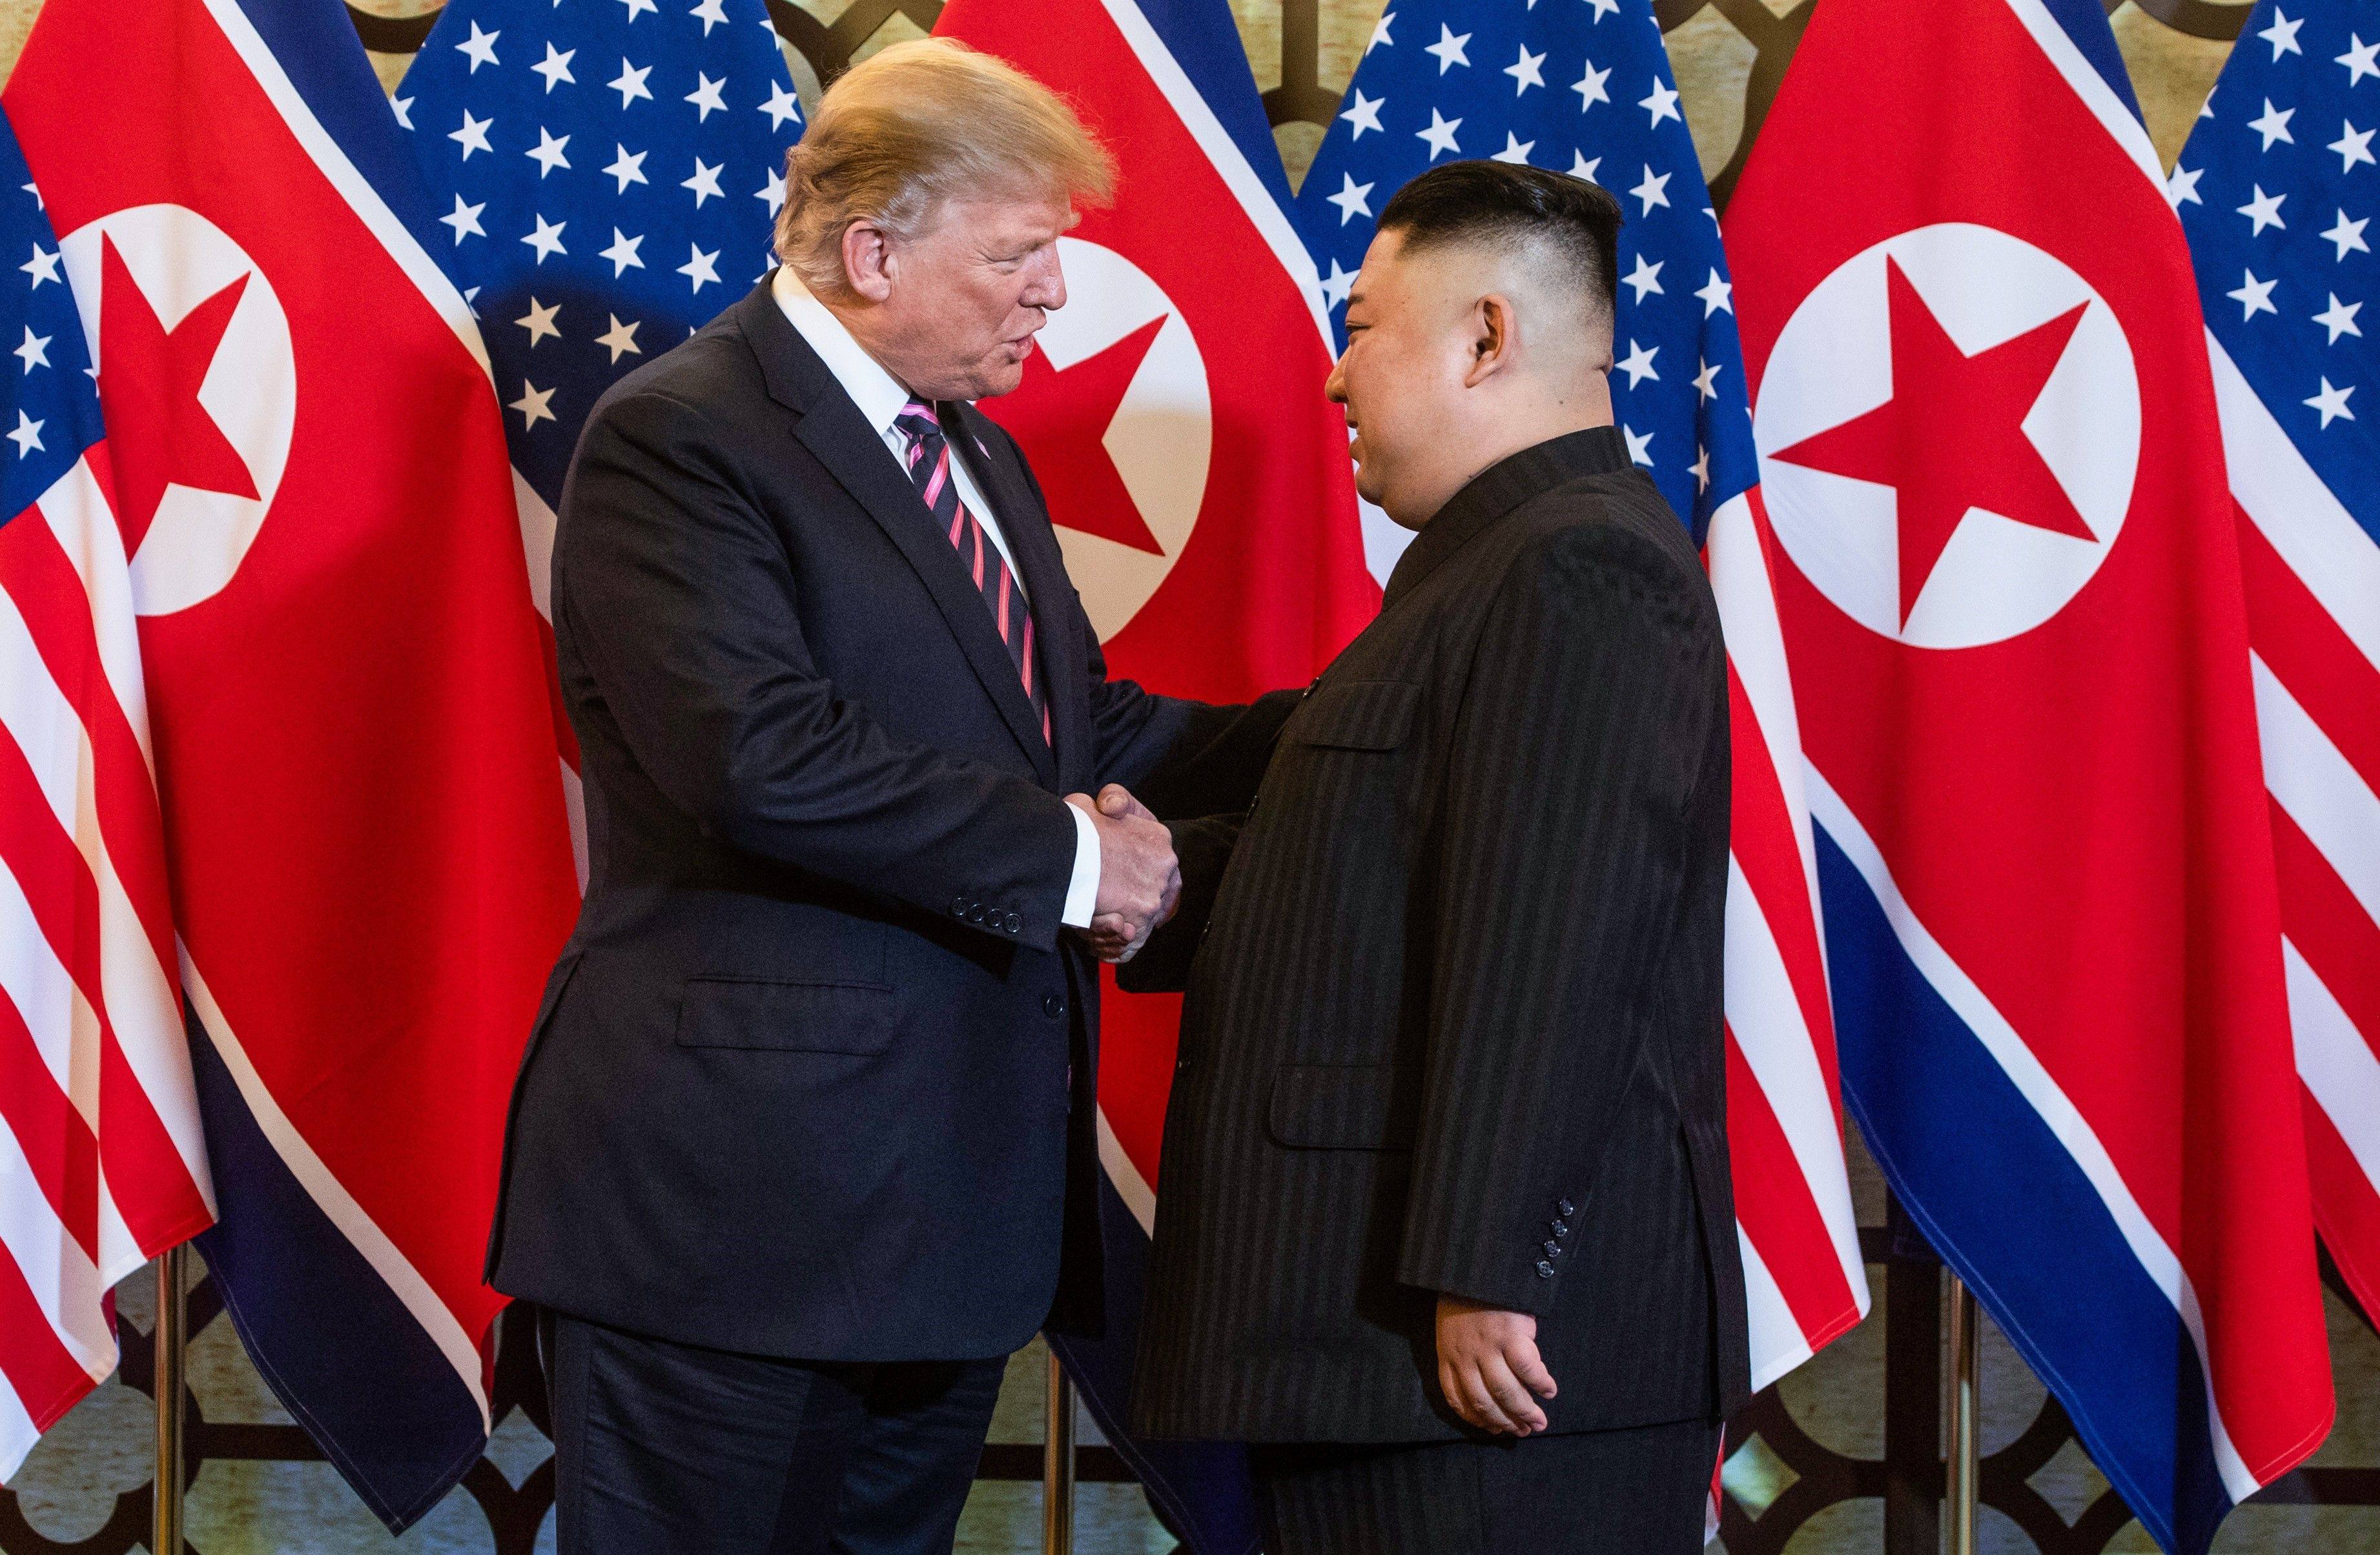 US President Donald Trump shakes hands with North Korea’s leader Kim Jong-un in Hanoi in February 2019. Photo: AFP